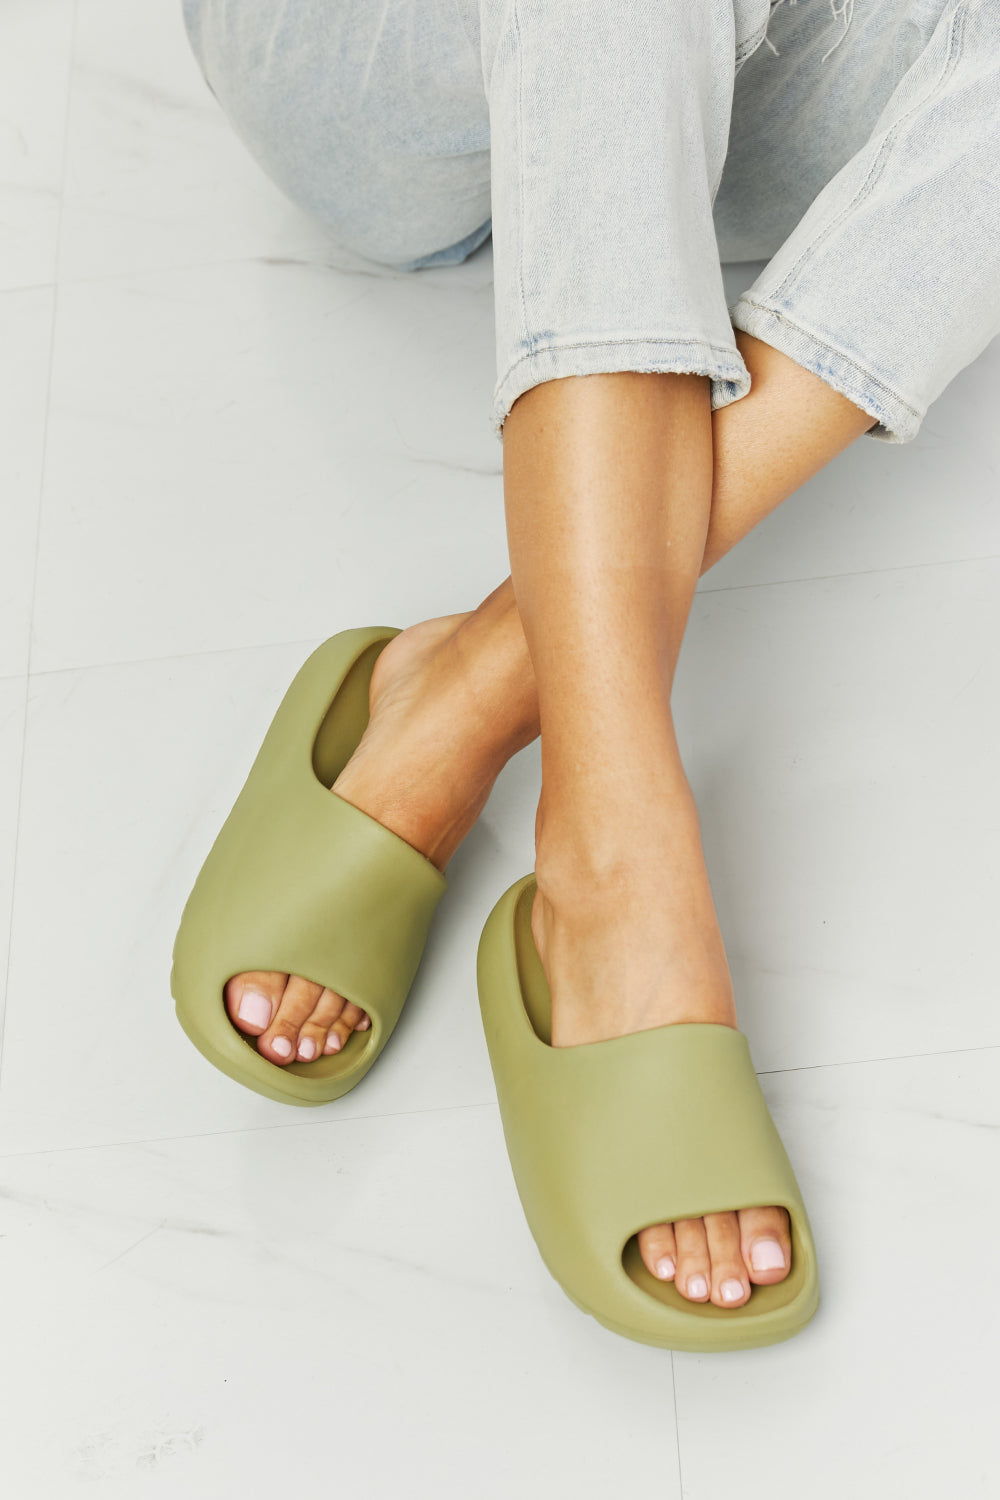 NOOK JOI In My Comfort Zone Slides in Green - Sydney So Sweet